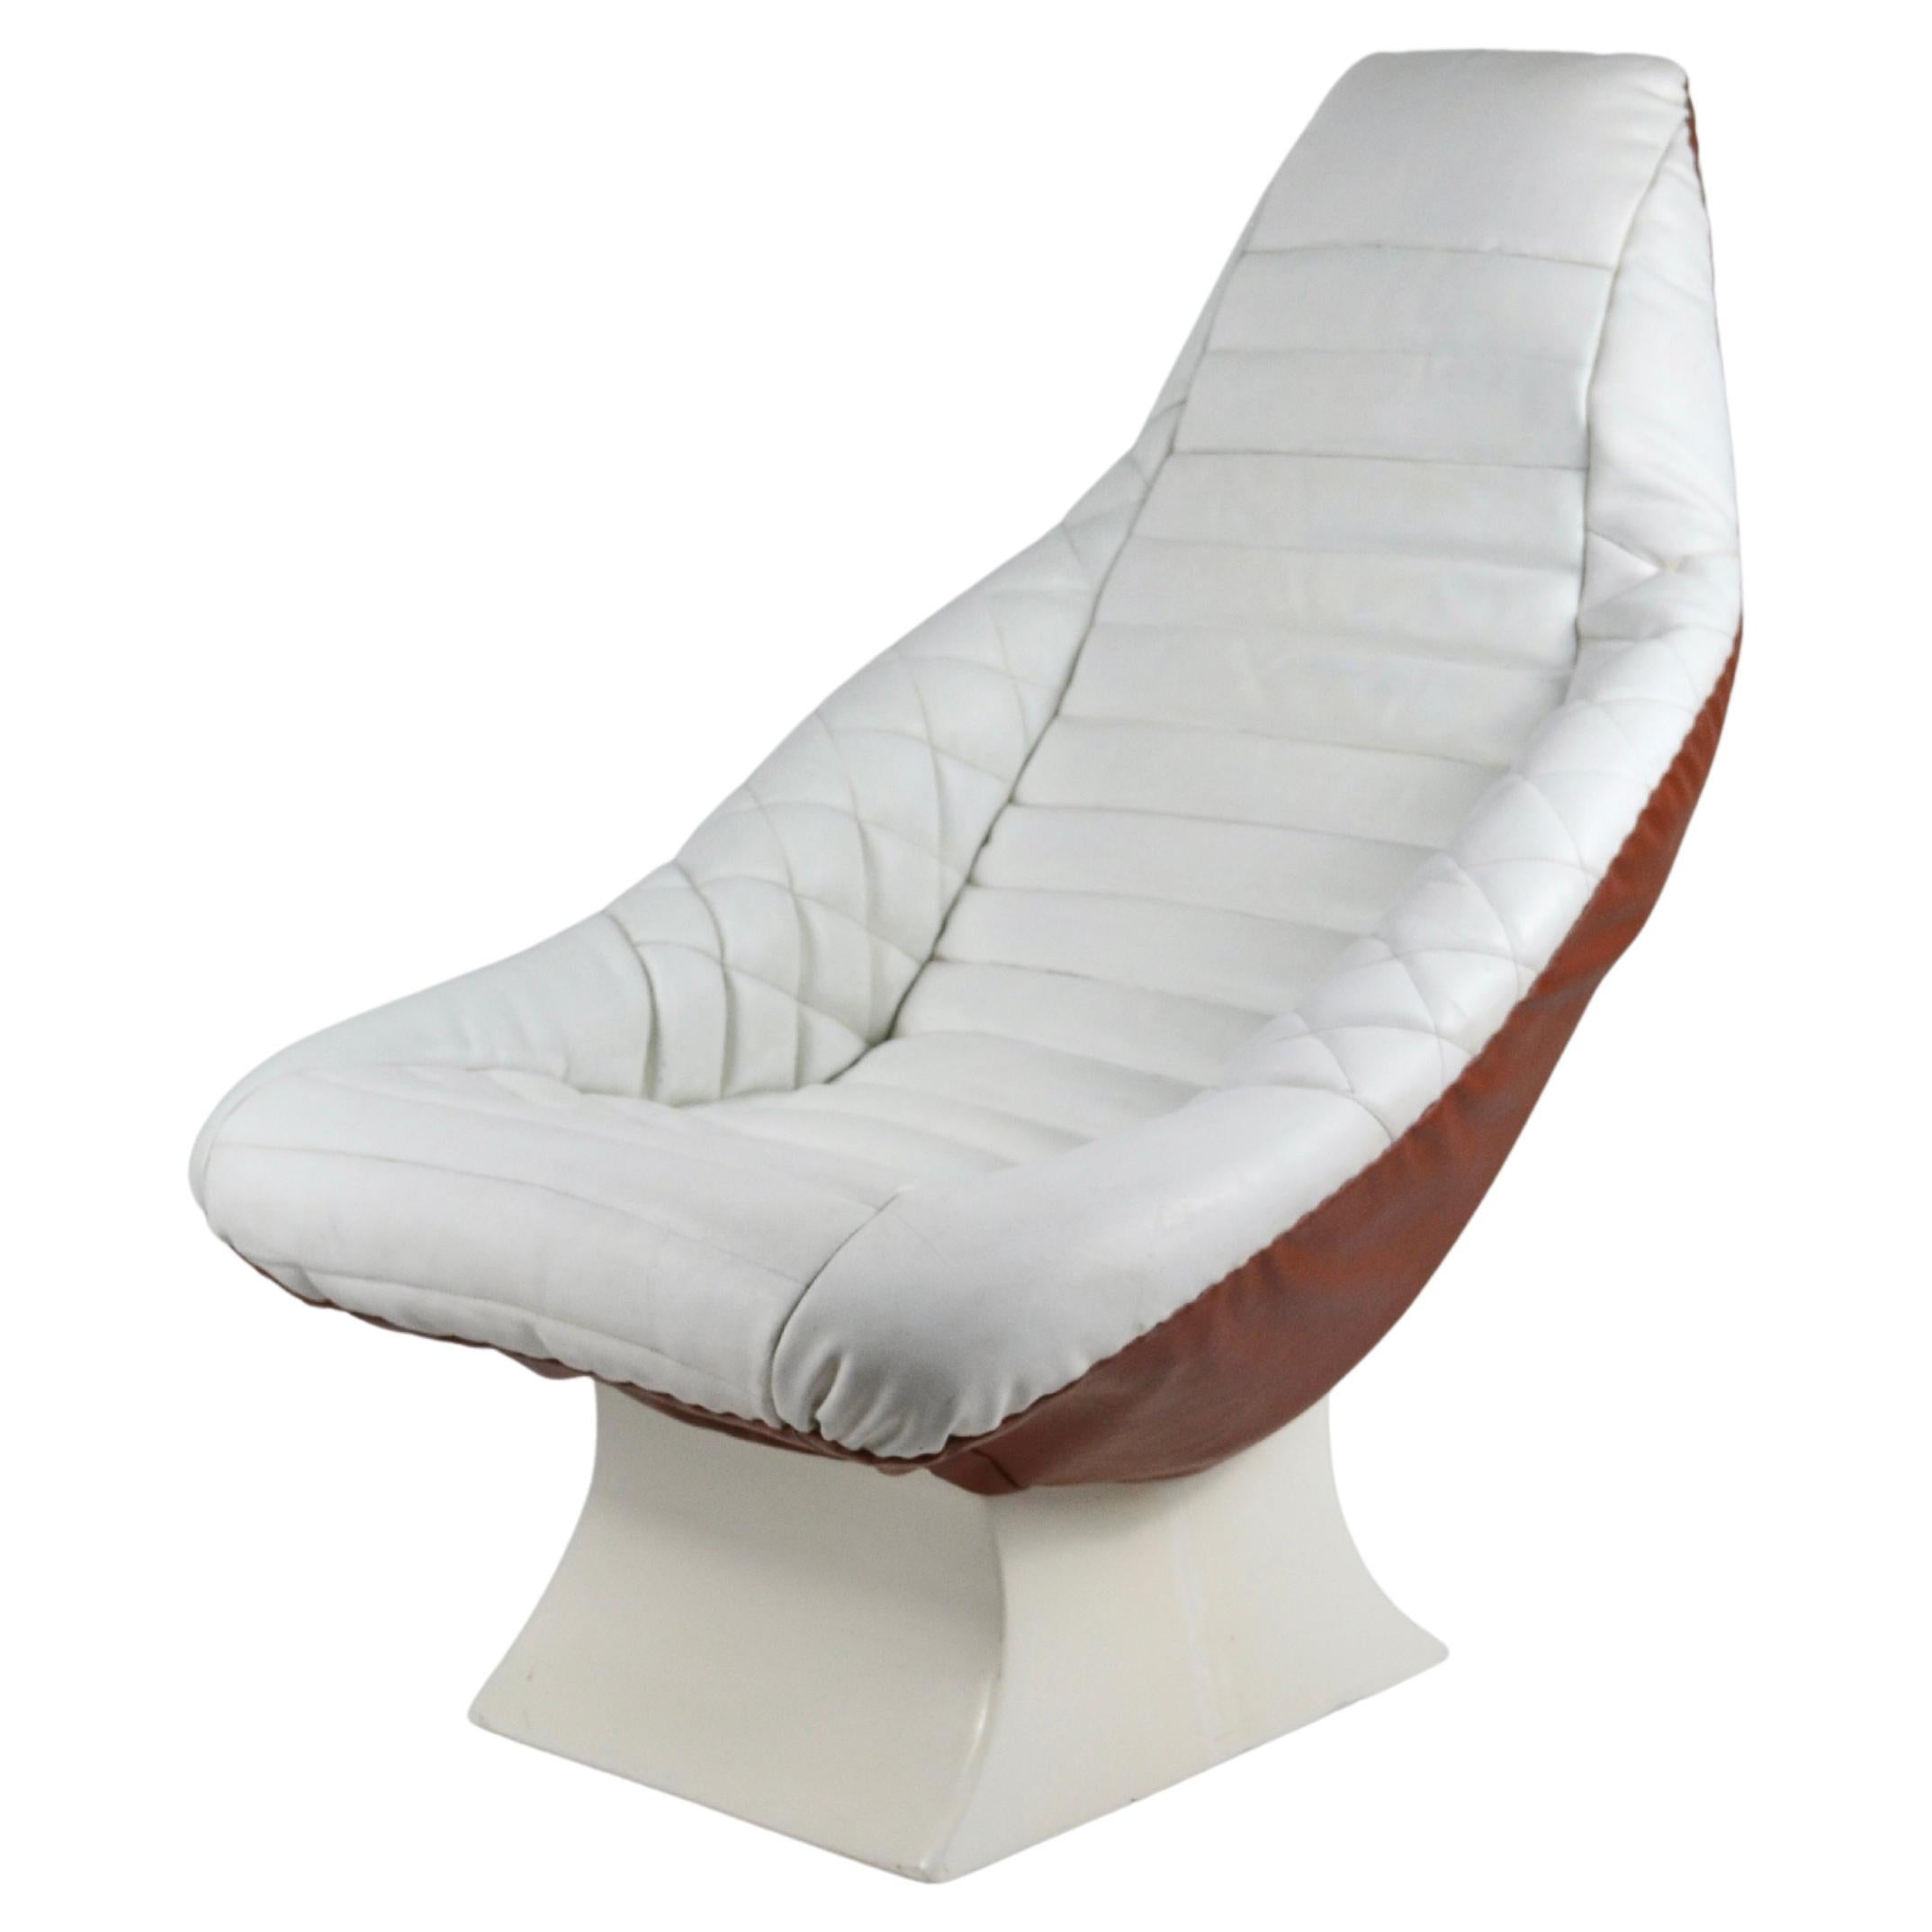 vintage space age armchair, leather and fiberglass, 1970's